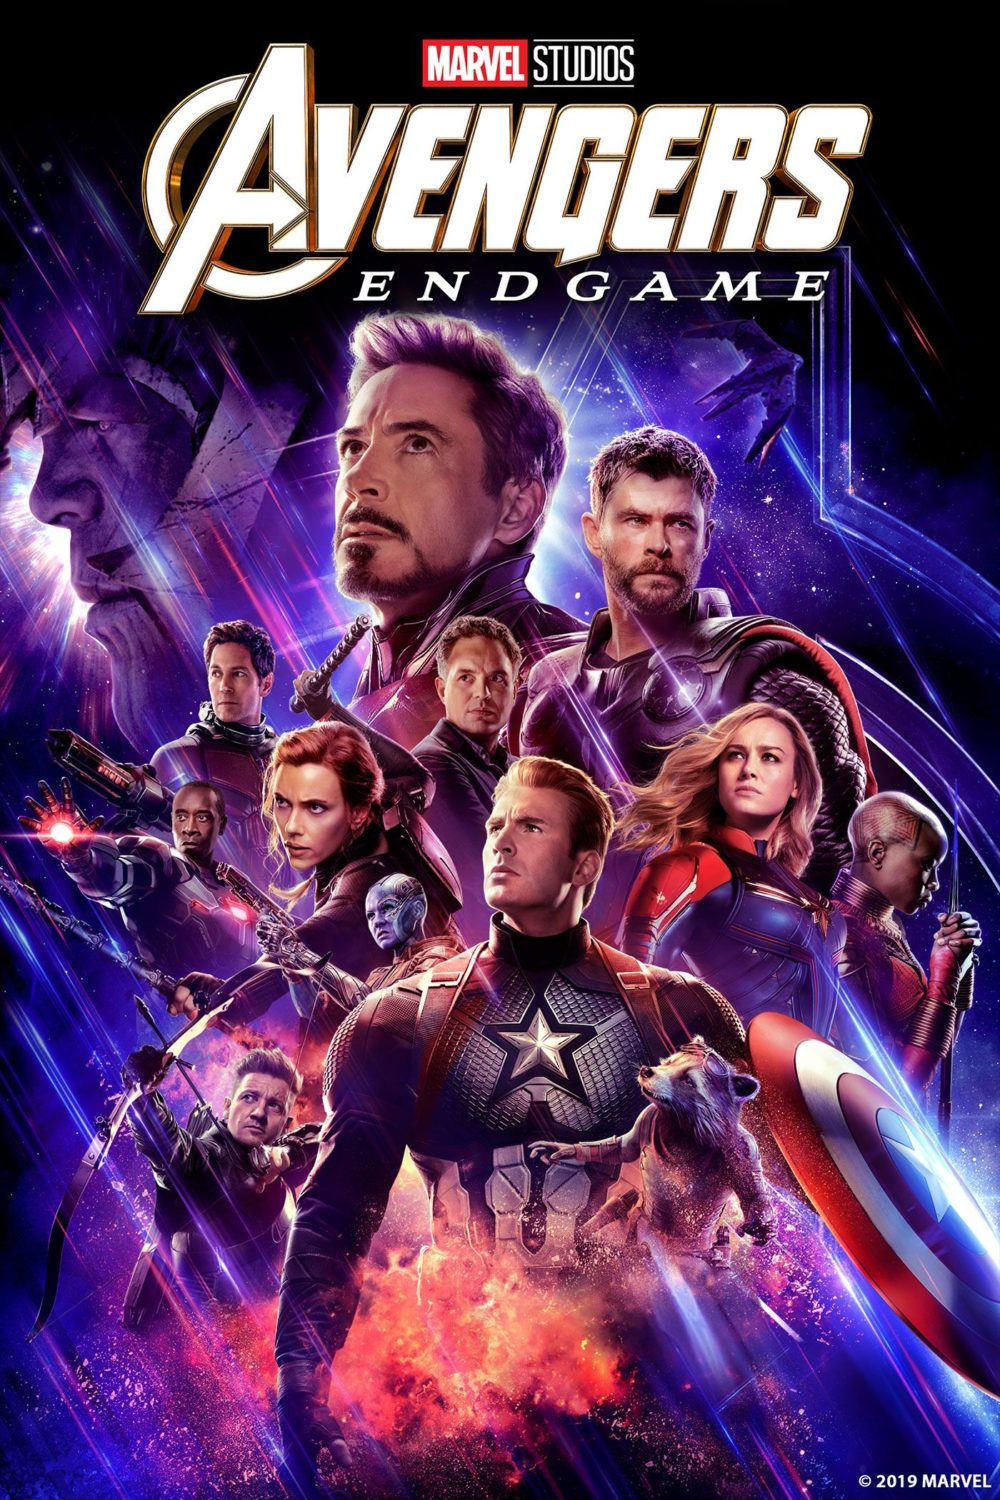 Avengers Endgame poster from successful Lost Boys School of VFX alumni film credits for Visual Effects.